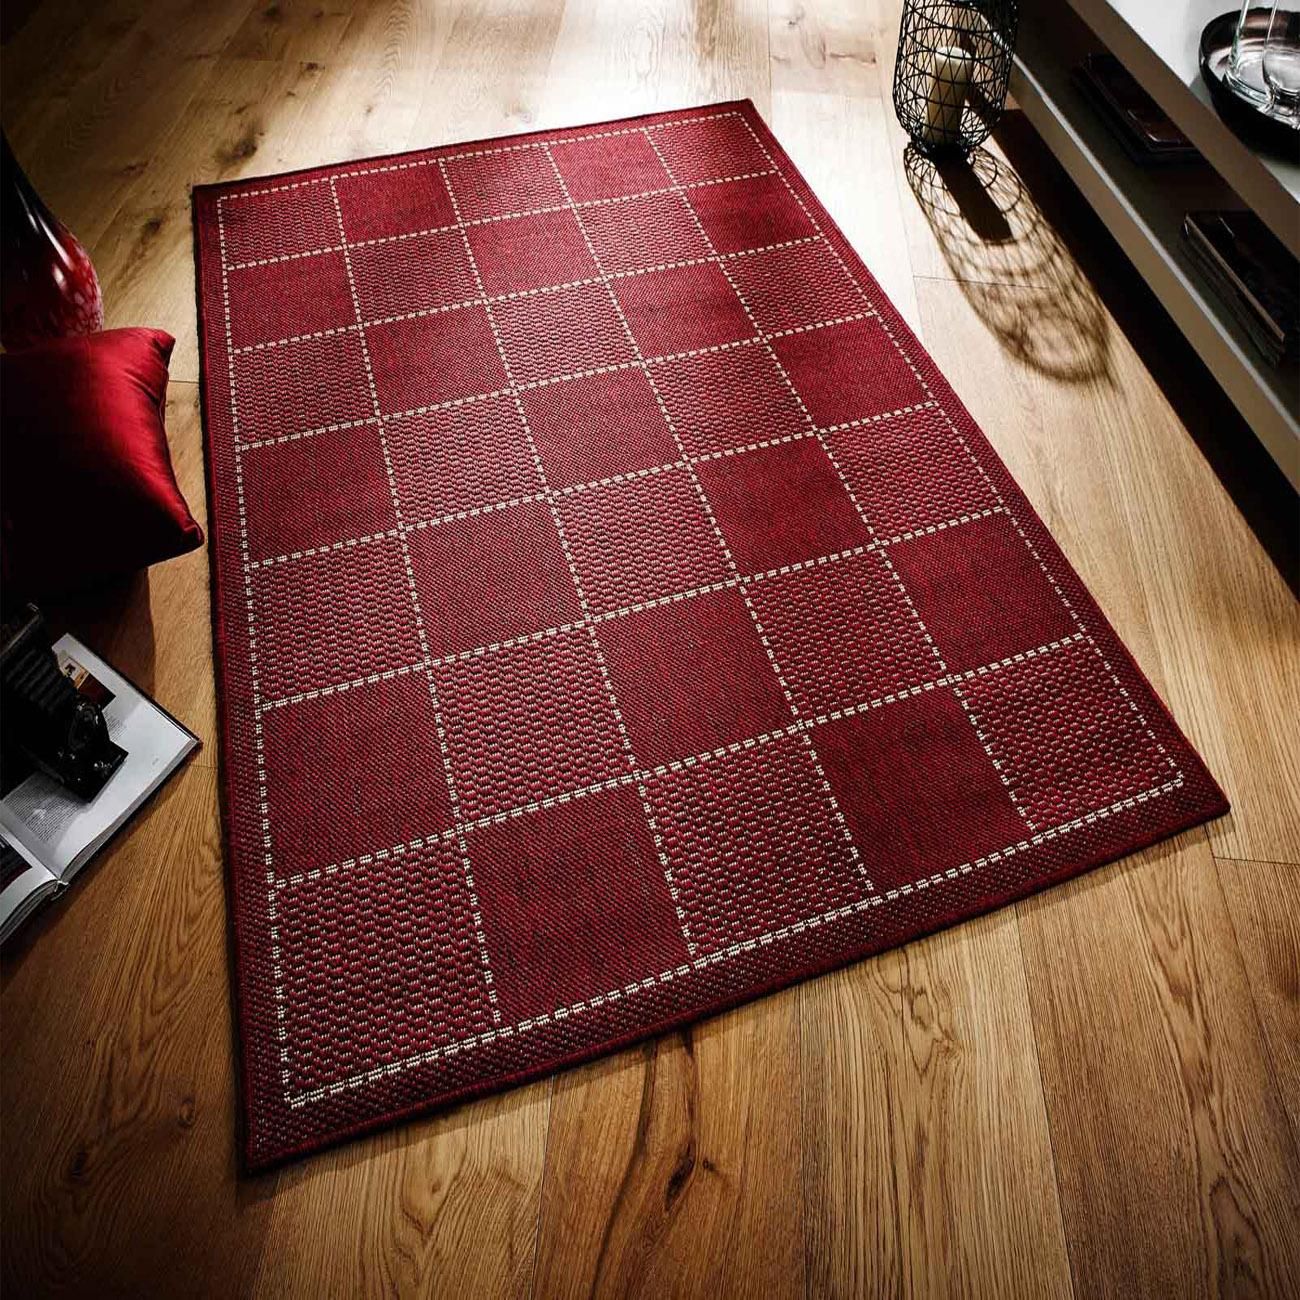 Checked Red Kitchen Rug With Antislip, Red Rugs For Kitchen